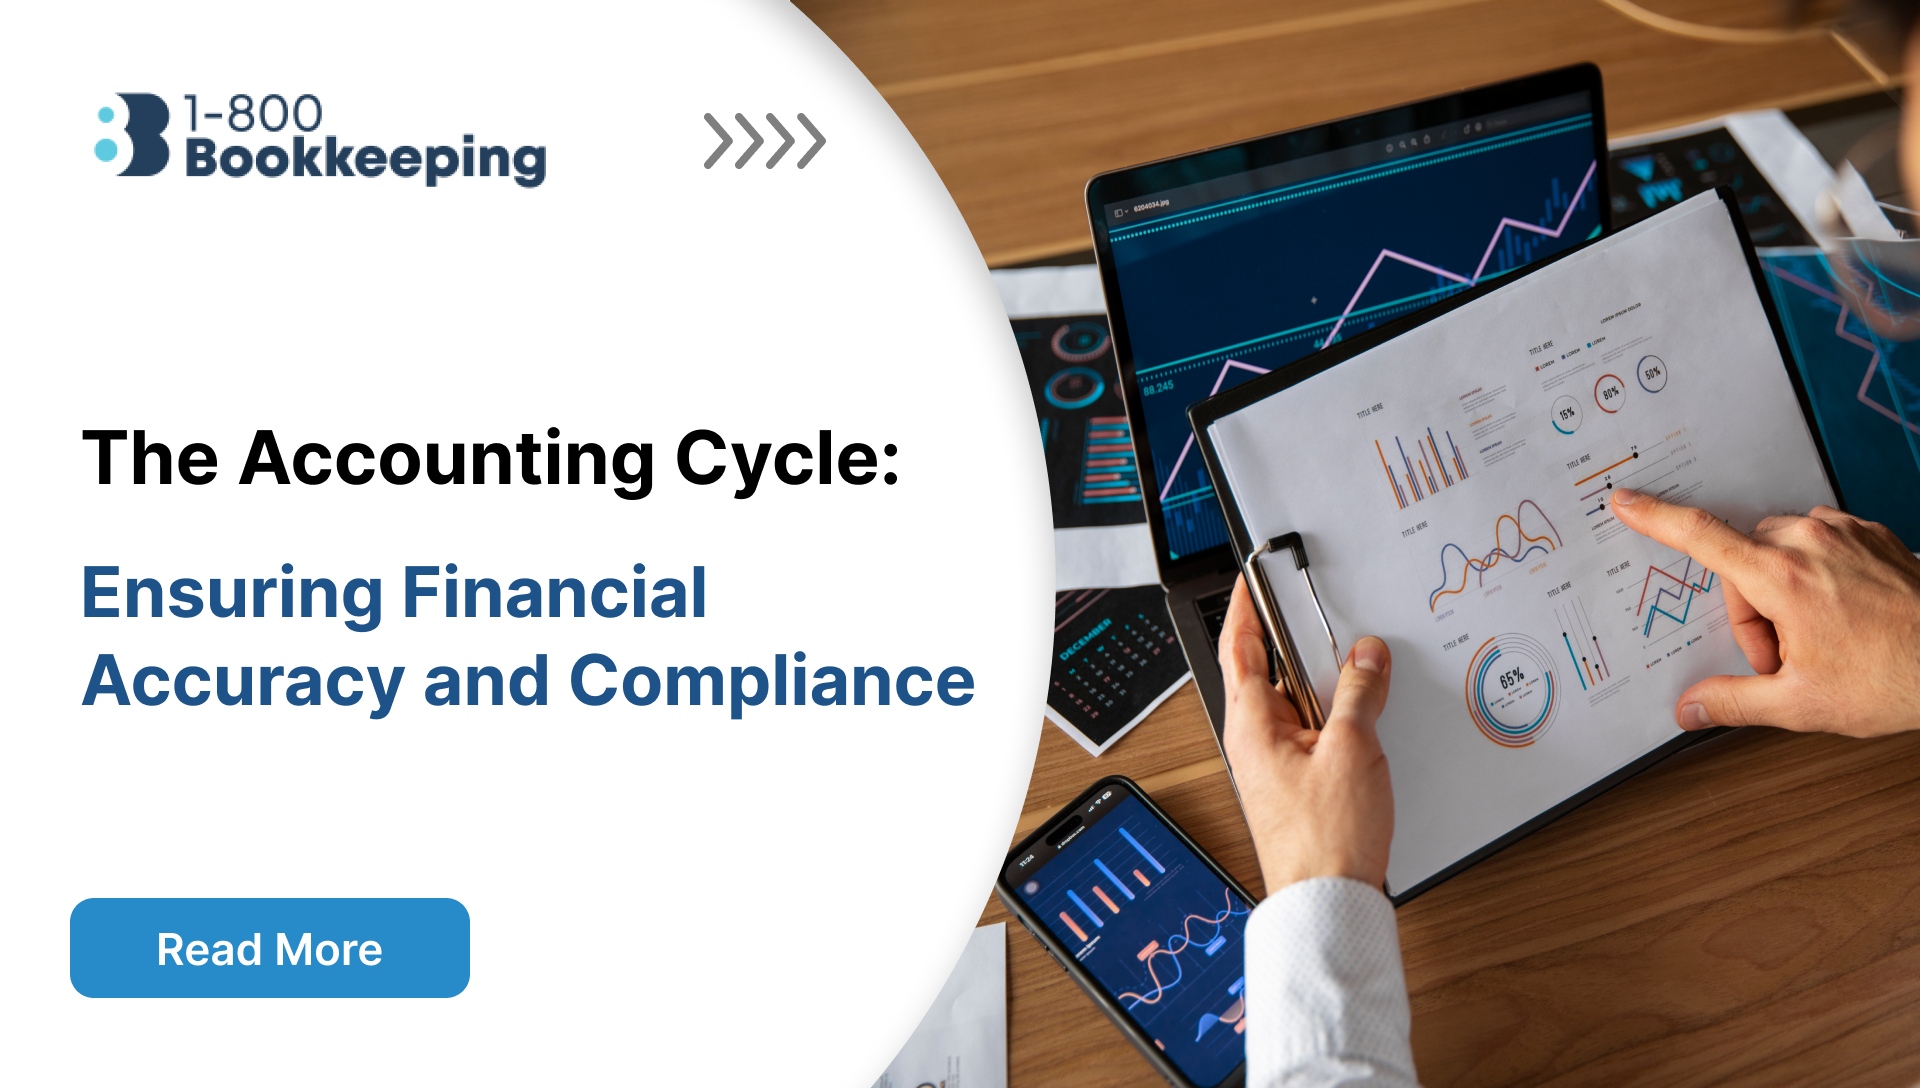 The Accounting Cycle: Ensuring Financial Accuracy and Compliance